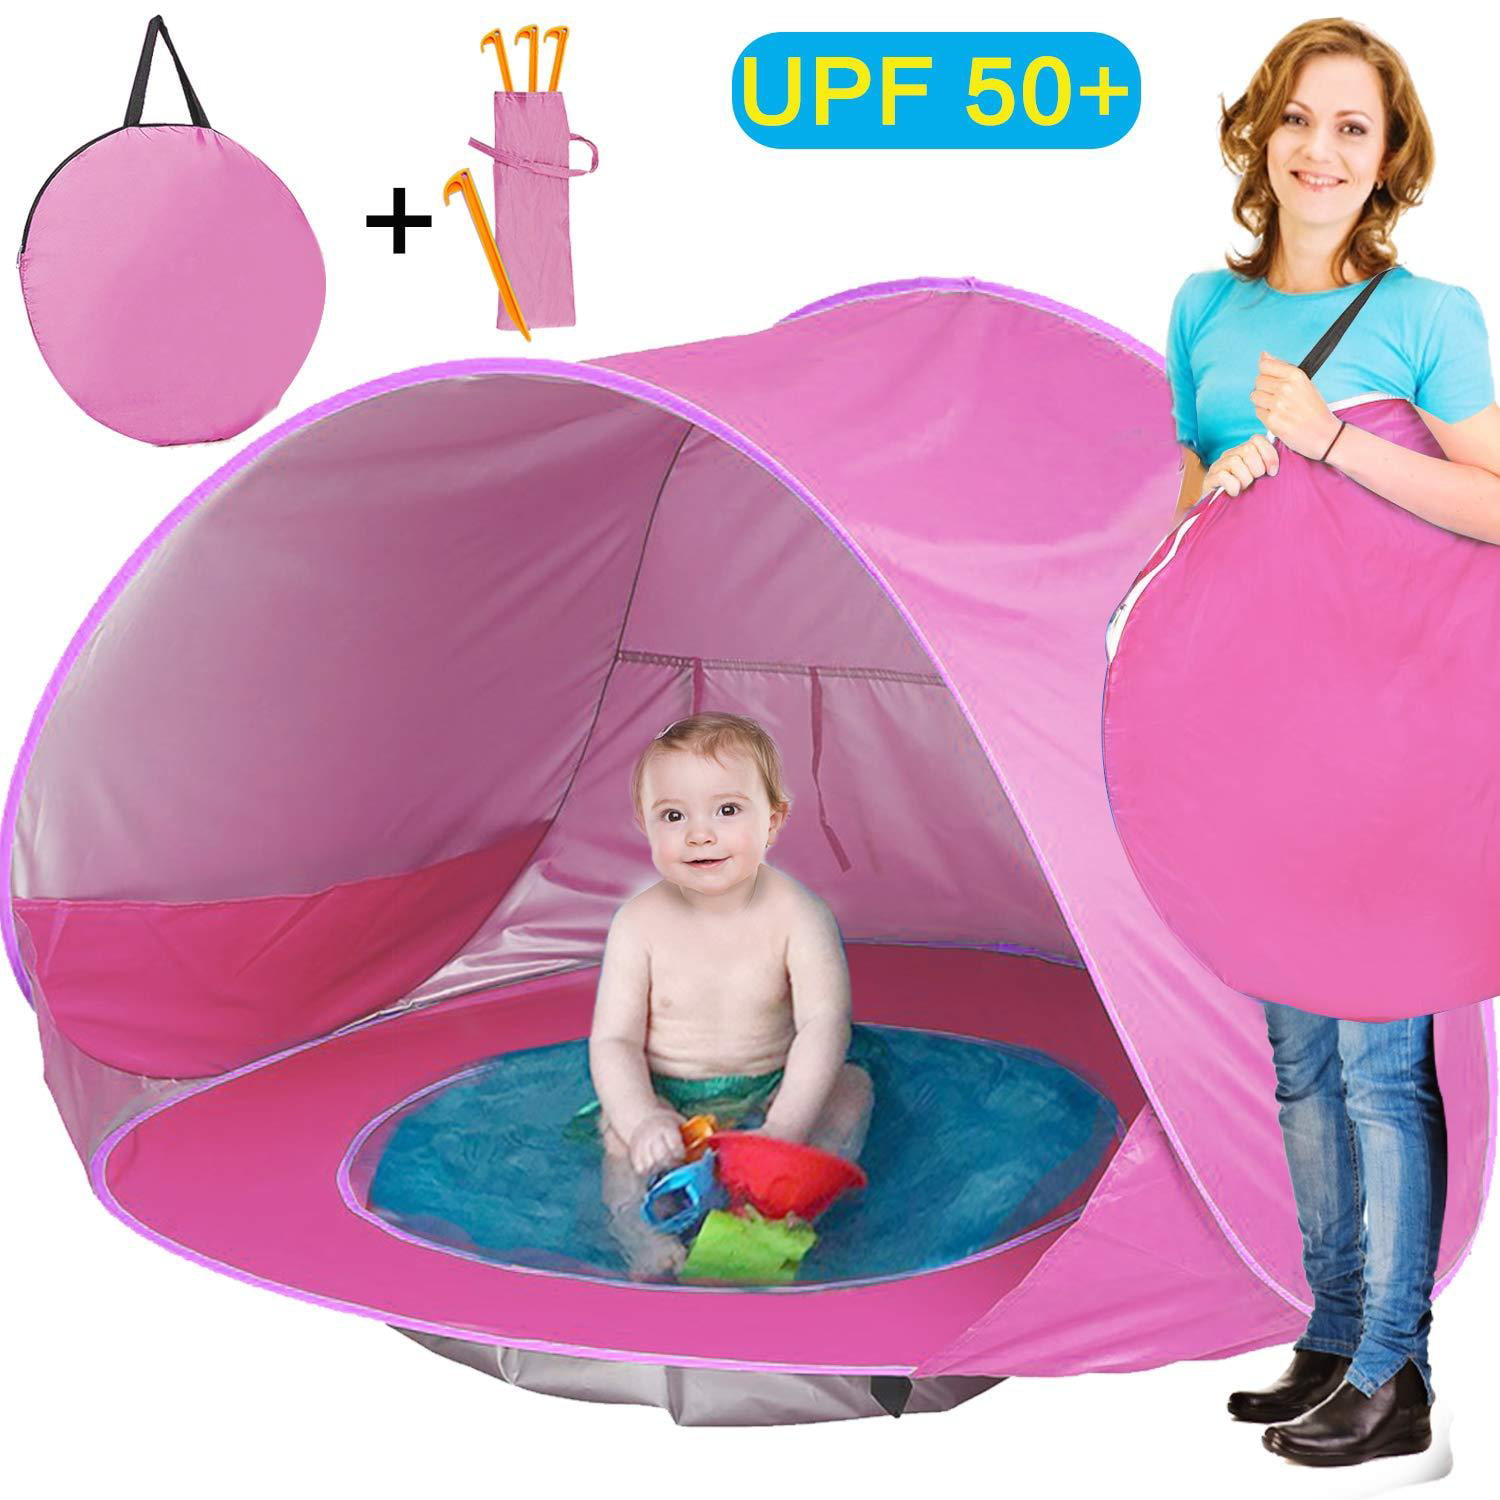 Baby Beach Tent 50+ UPF UV Protection & Waterproof 300MM Pop Up Portable Sun Shelter with Pool Summer Outdoor Baby Tent for Aged 0-4 Infant Toddler Kids Parks Beach Shade